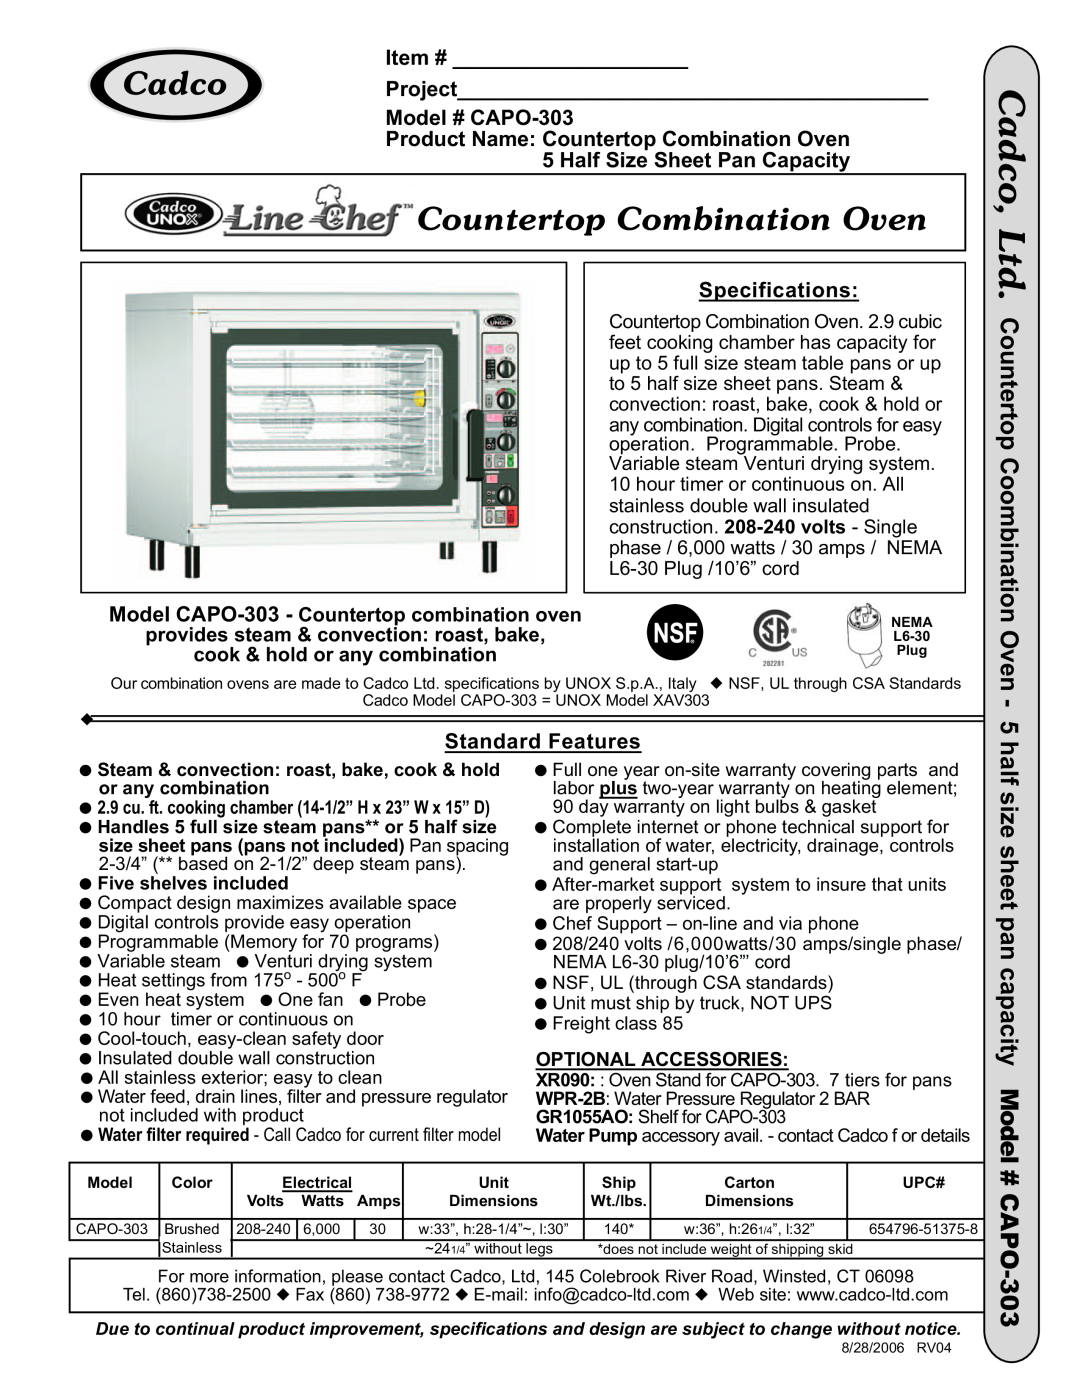 Cadco dimensions Countertop Coombination Oven, Item #, Project, Model # CAPO-303, Half Size Sheet Pan Capacity 